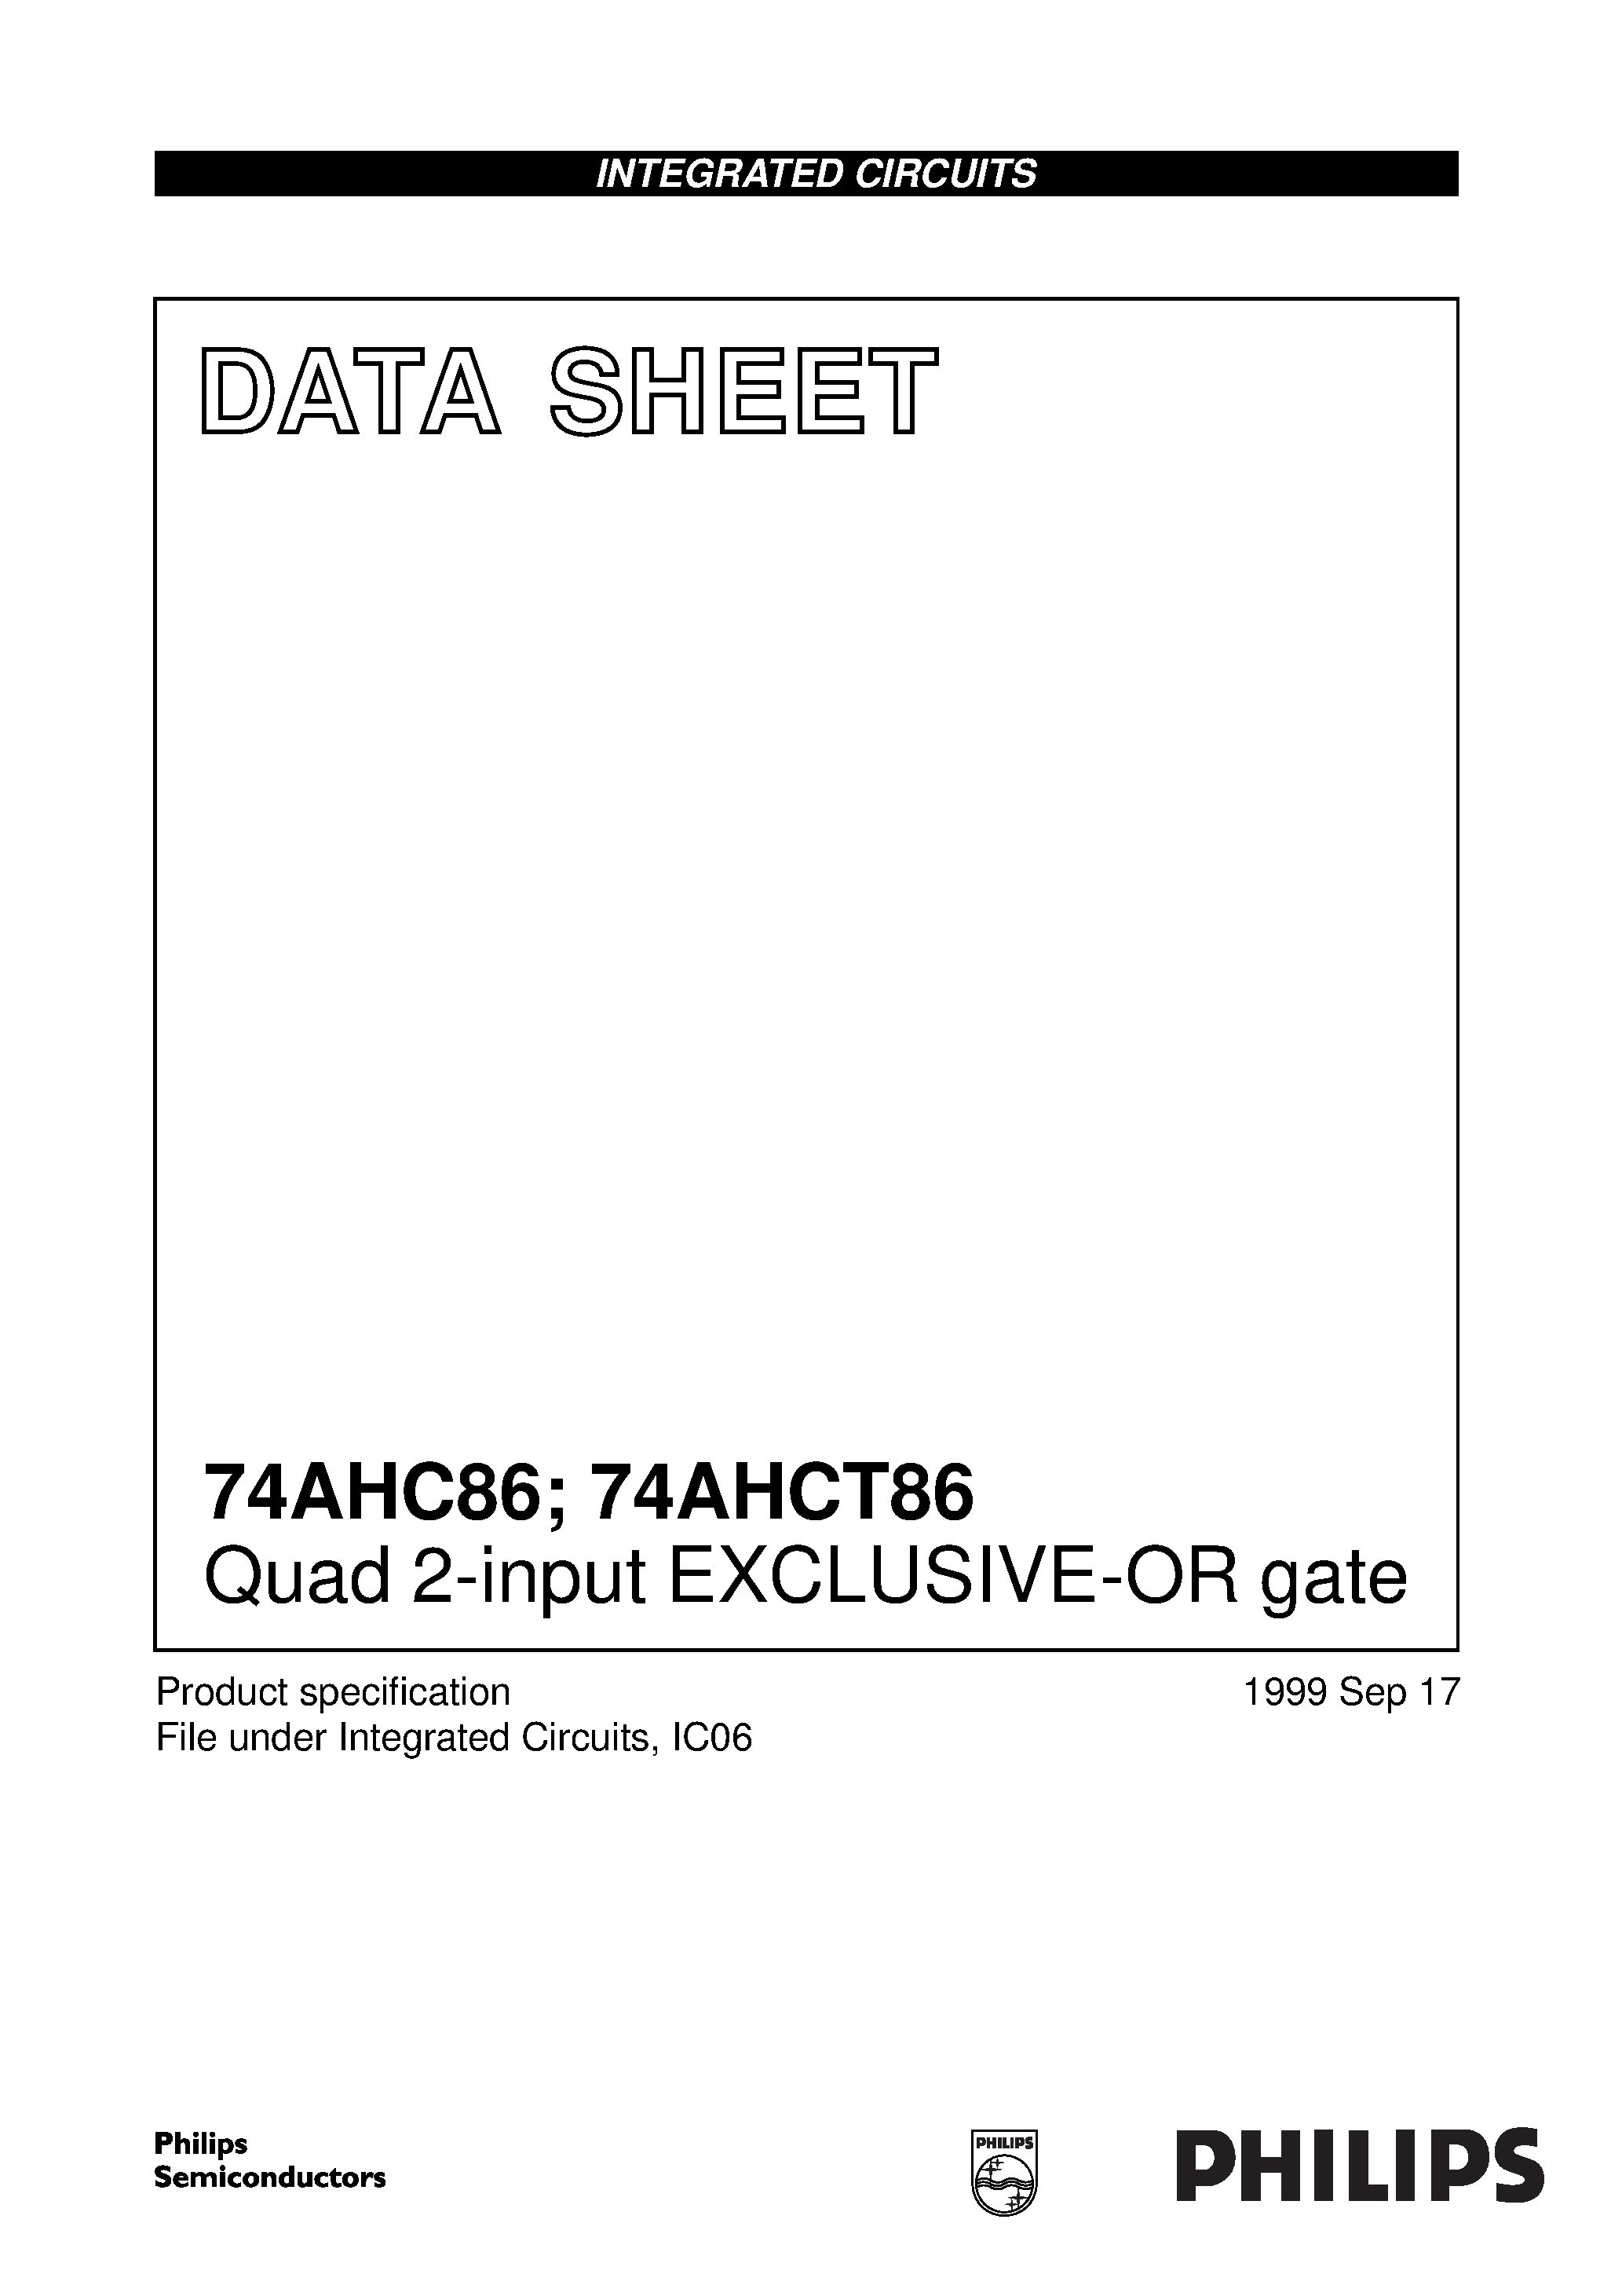 Datasheet 74AHCT86D - Quad 2-input EXCLUSIVE-OR gate page 1